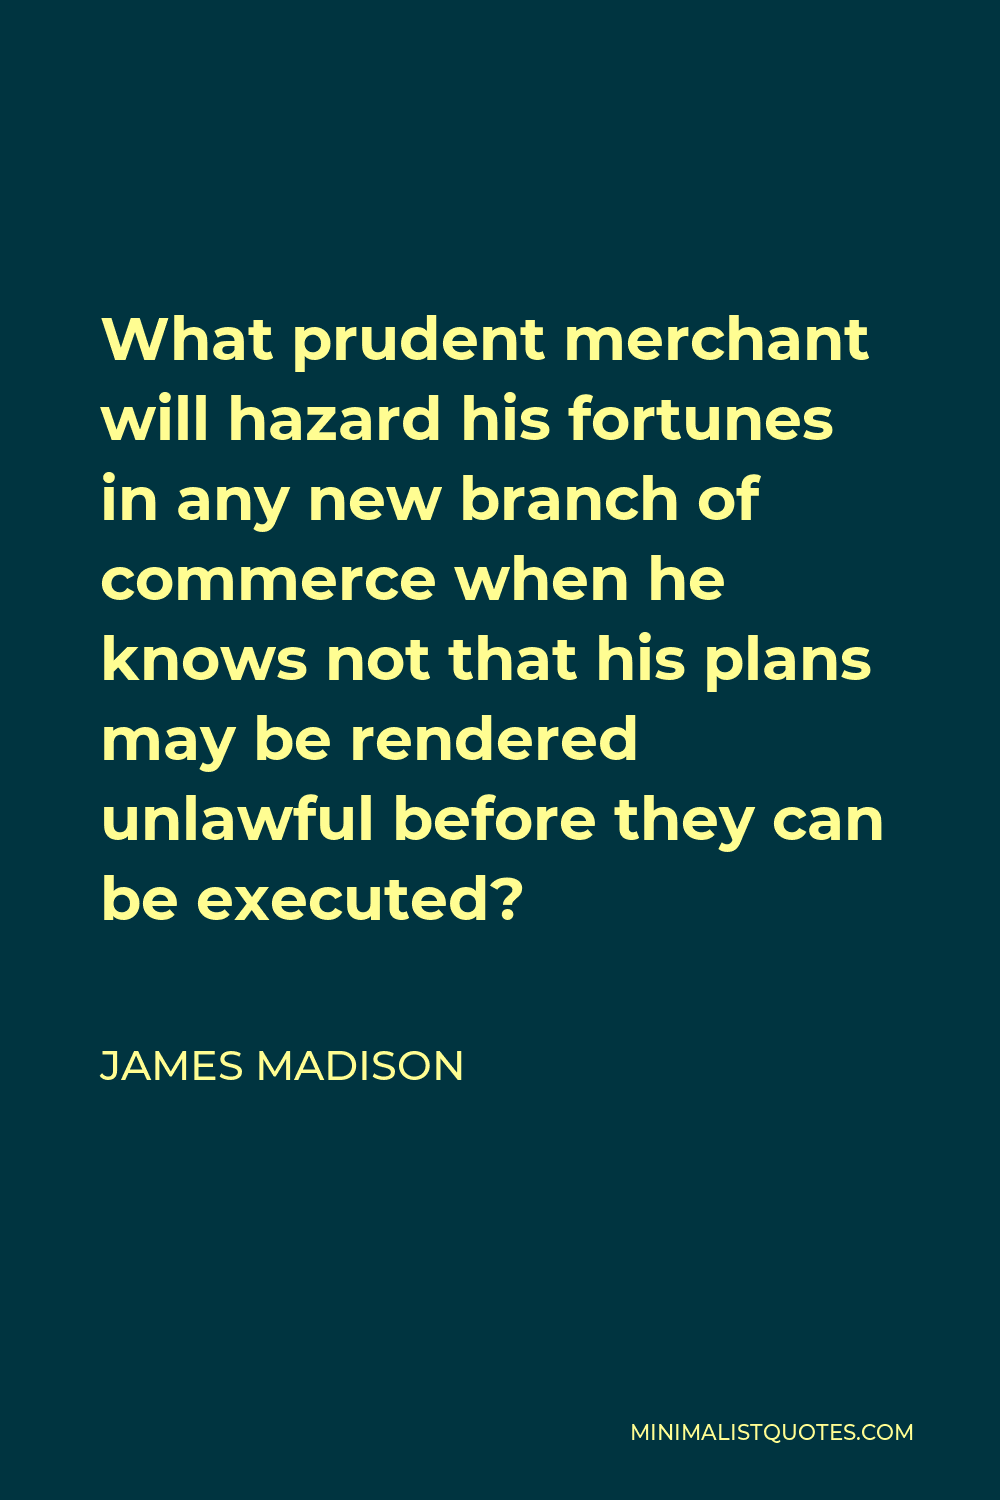 James Madison Quote - What prudent merchant will hazard his fortunes in any new branch of commerce when he knows not that his plans may be rendered unlawful before they can be executed?